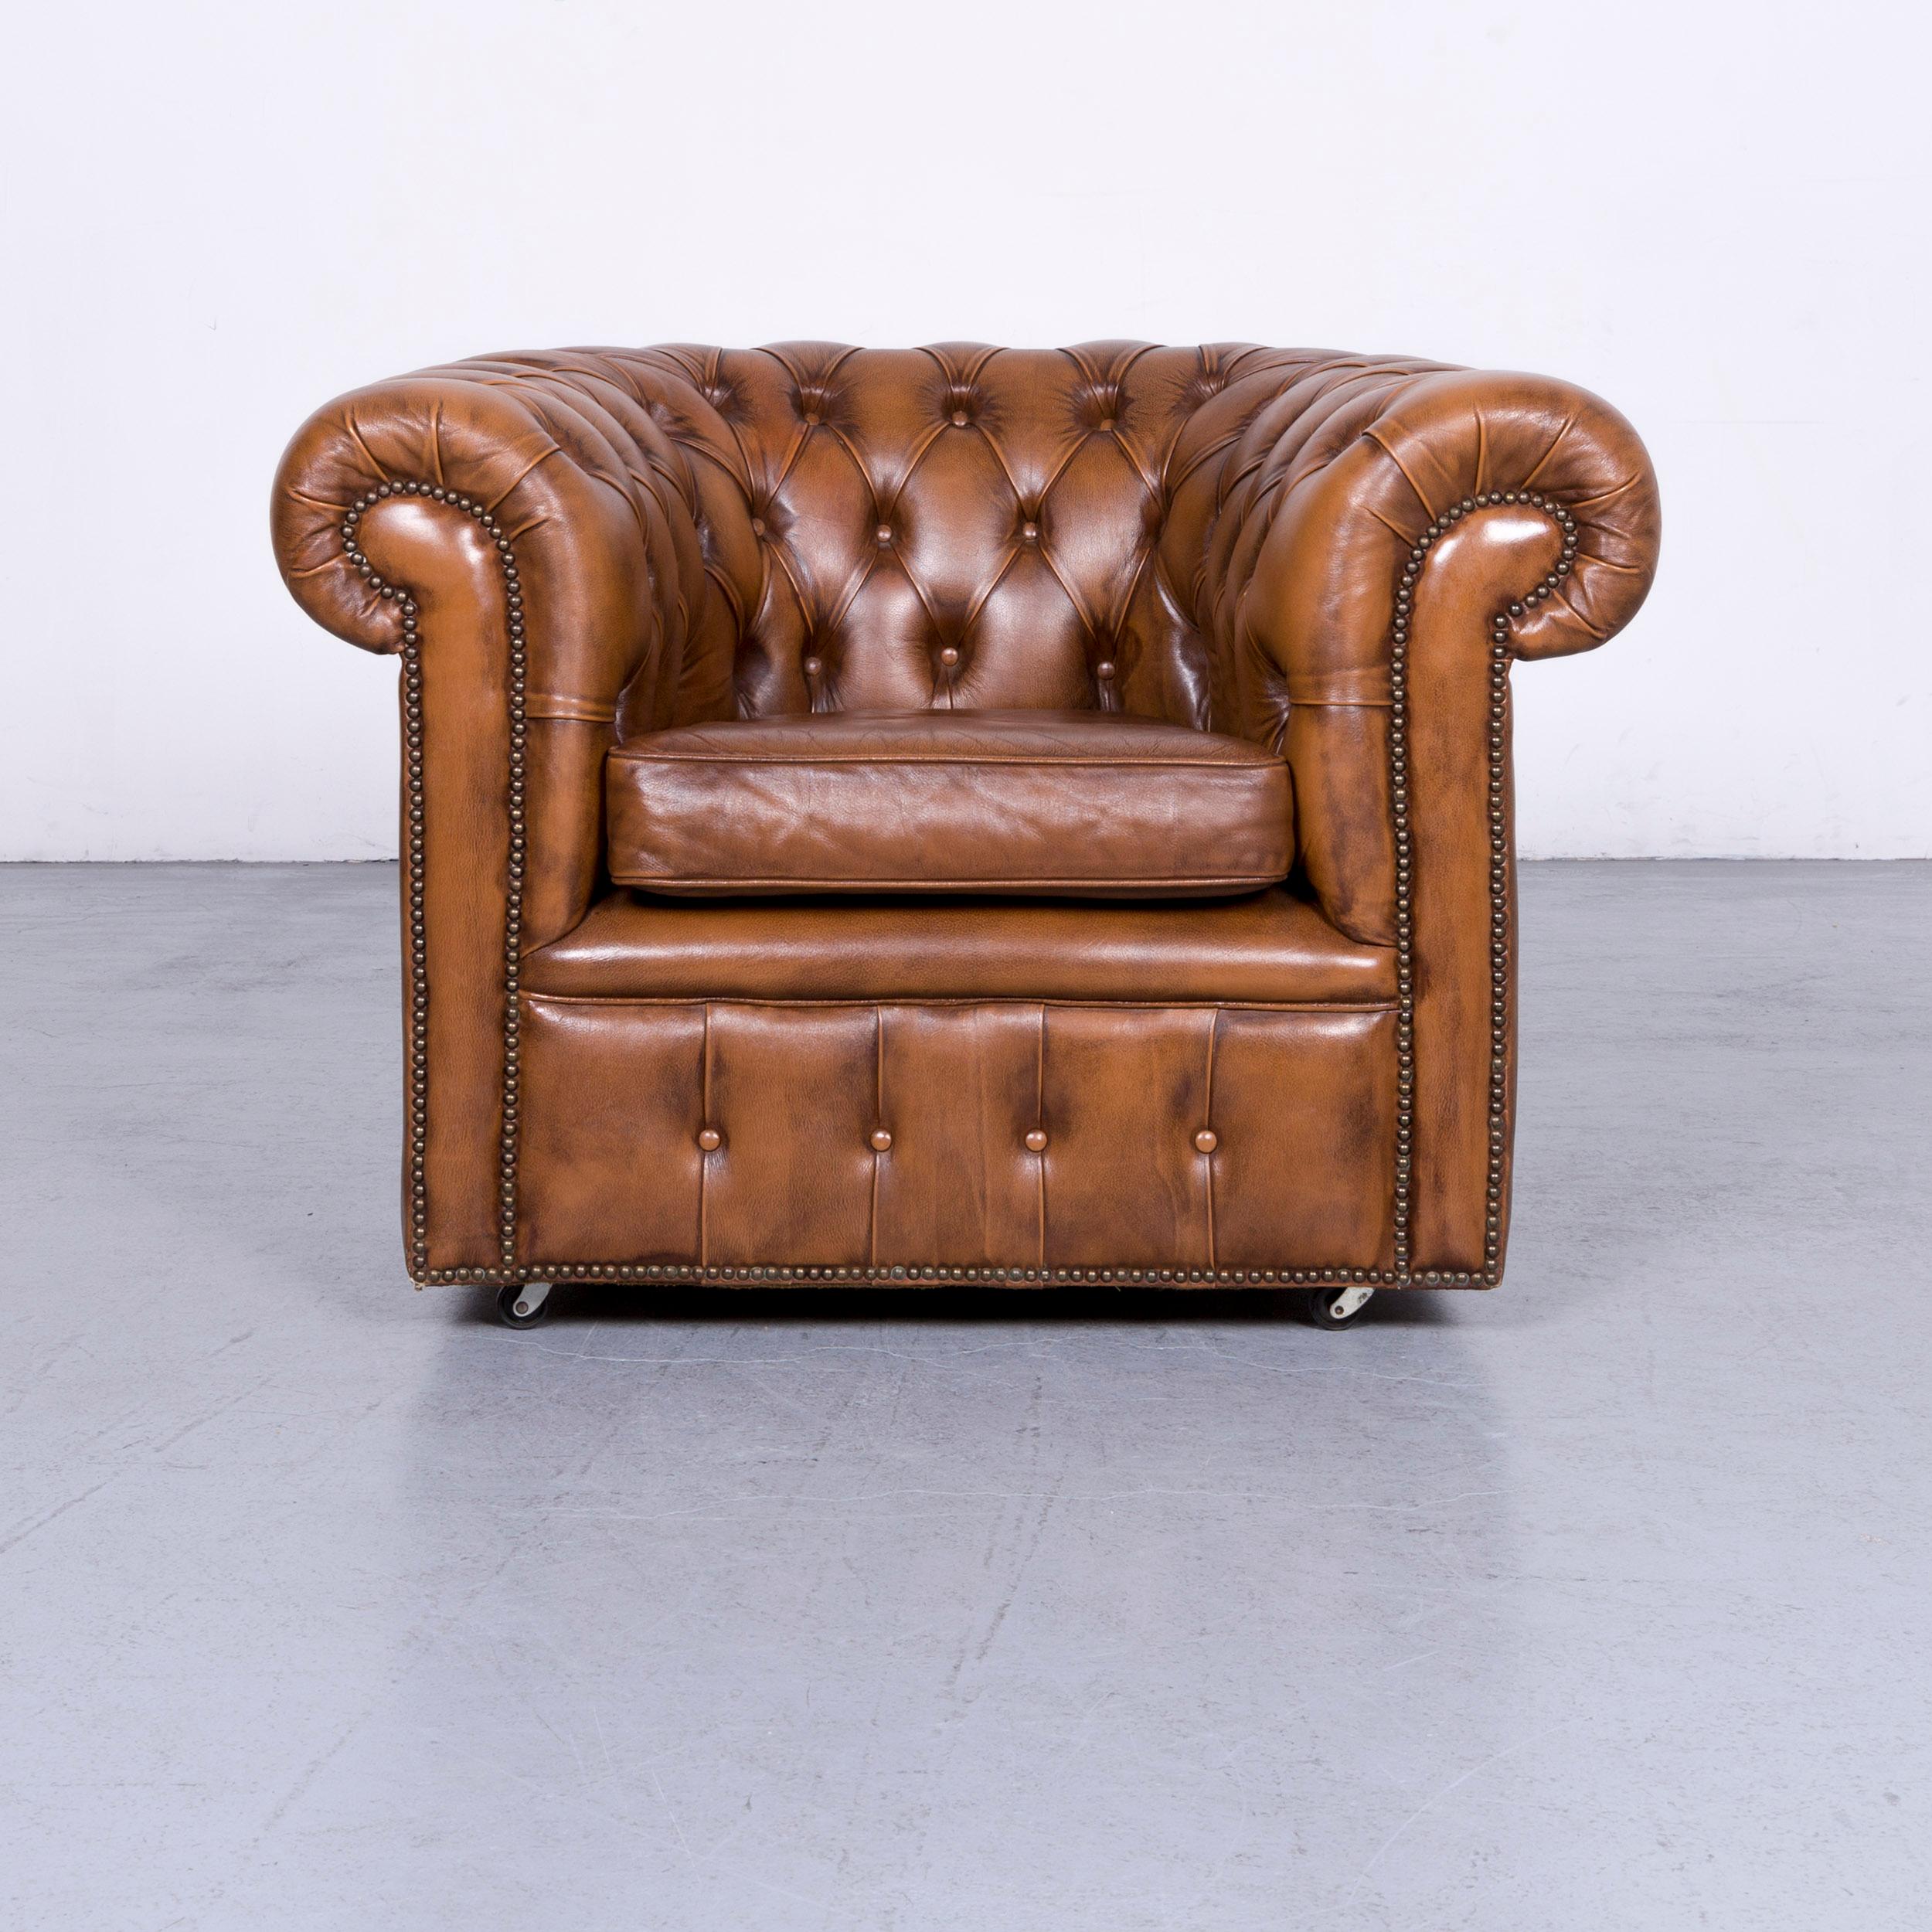 We bring to you a vintage brown Chesterfield leather armchair buttoned clubchair.